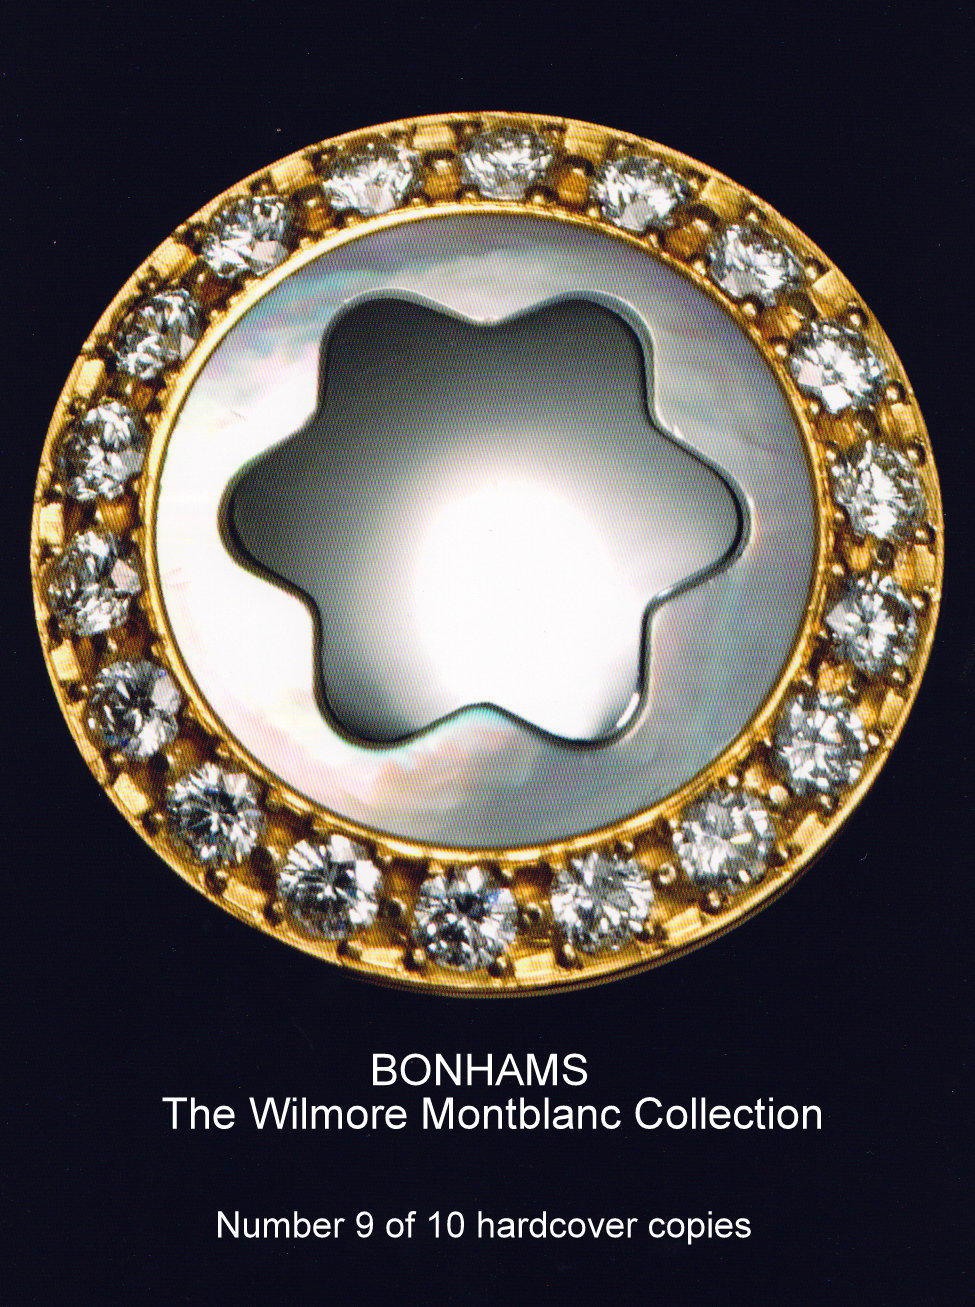 [MONTBLANC.] Hardcover Limited Edition of Bonhams' Wilmore Montblanc...